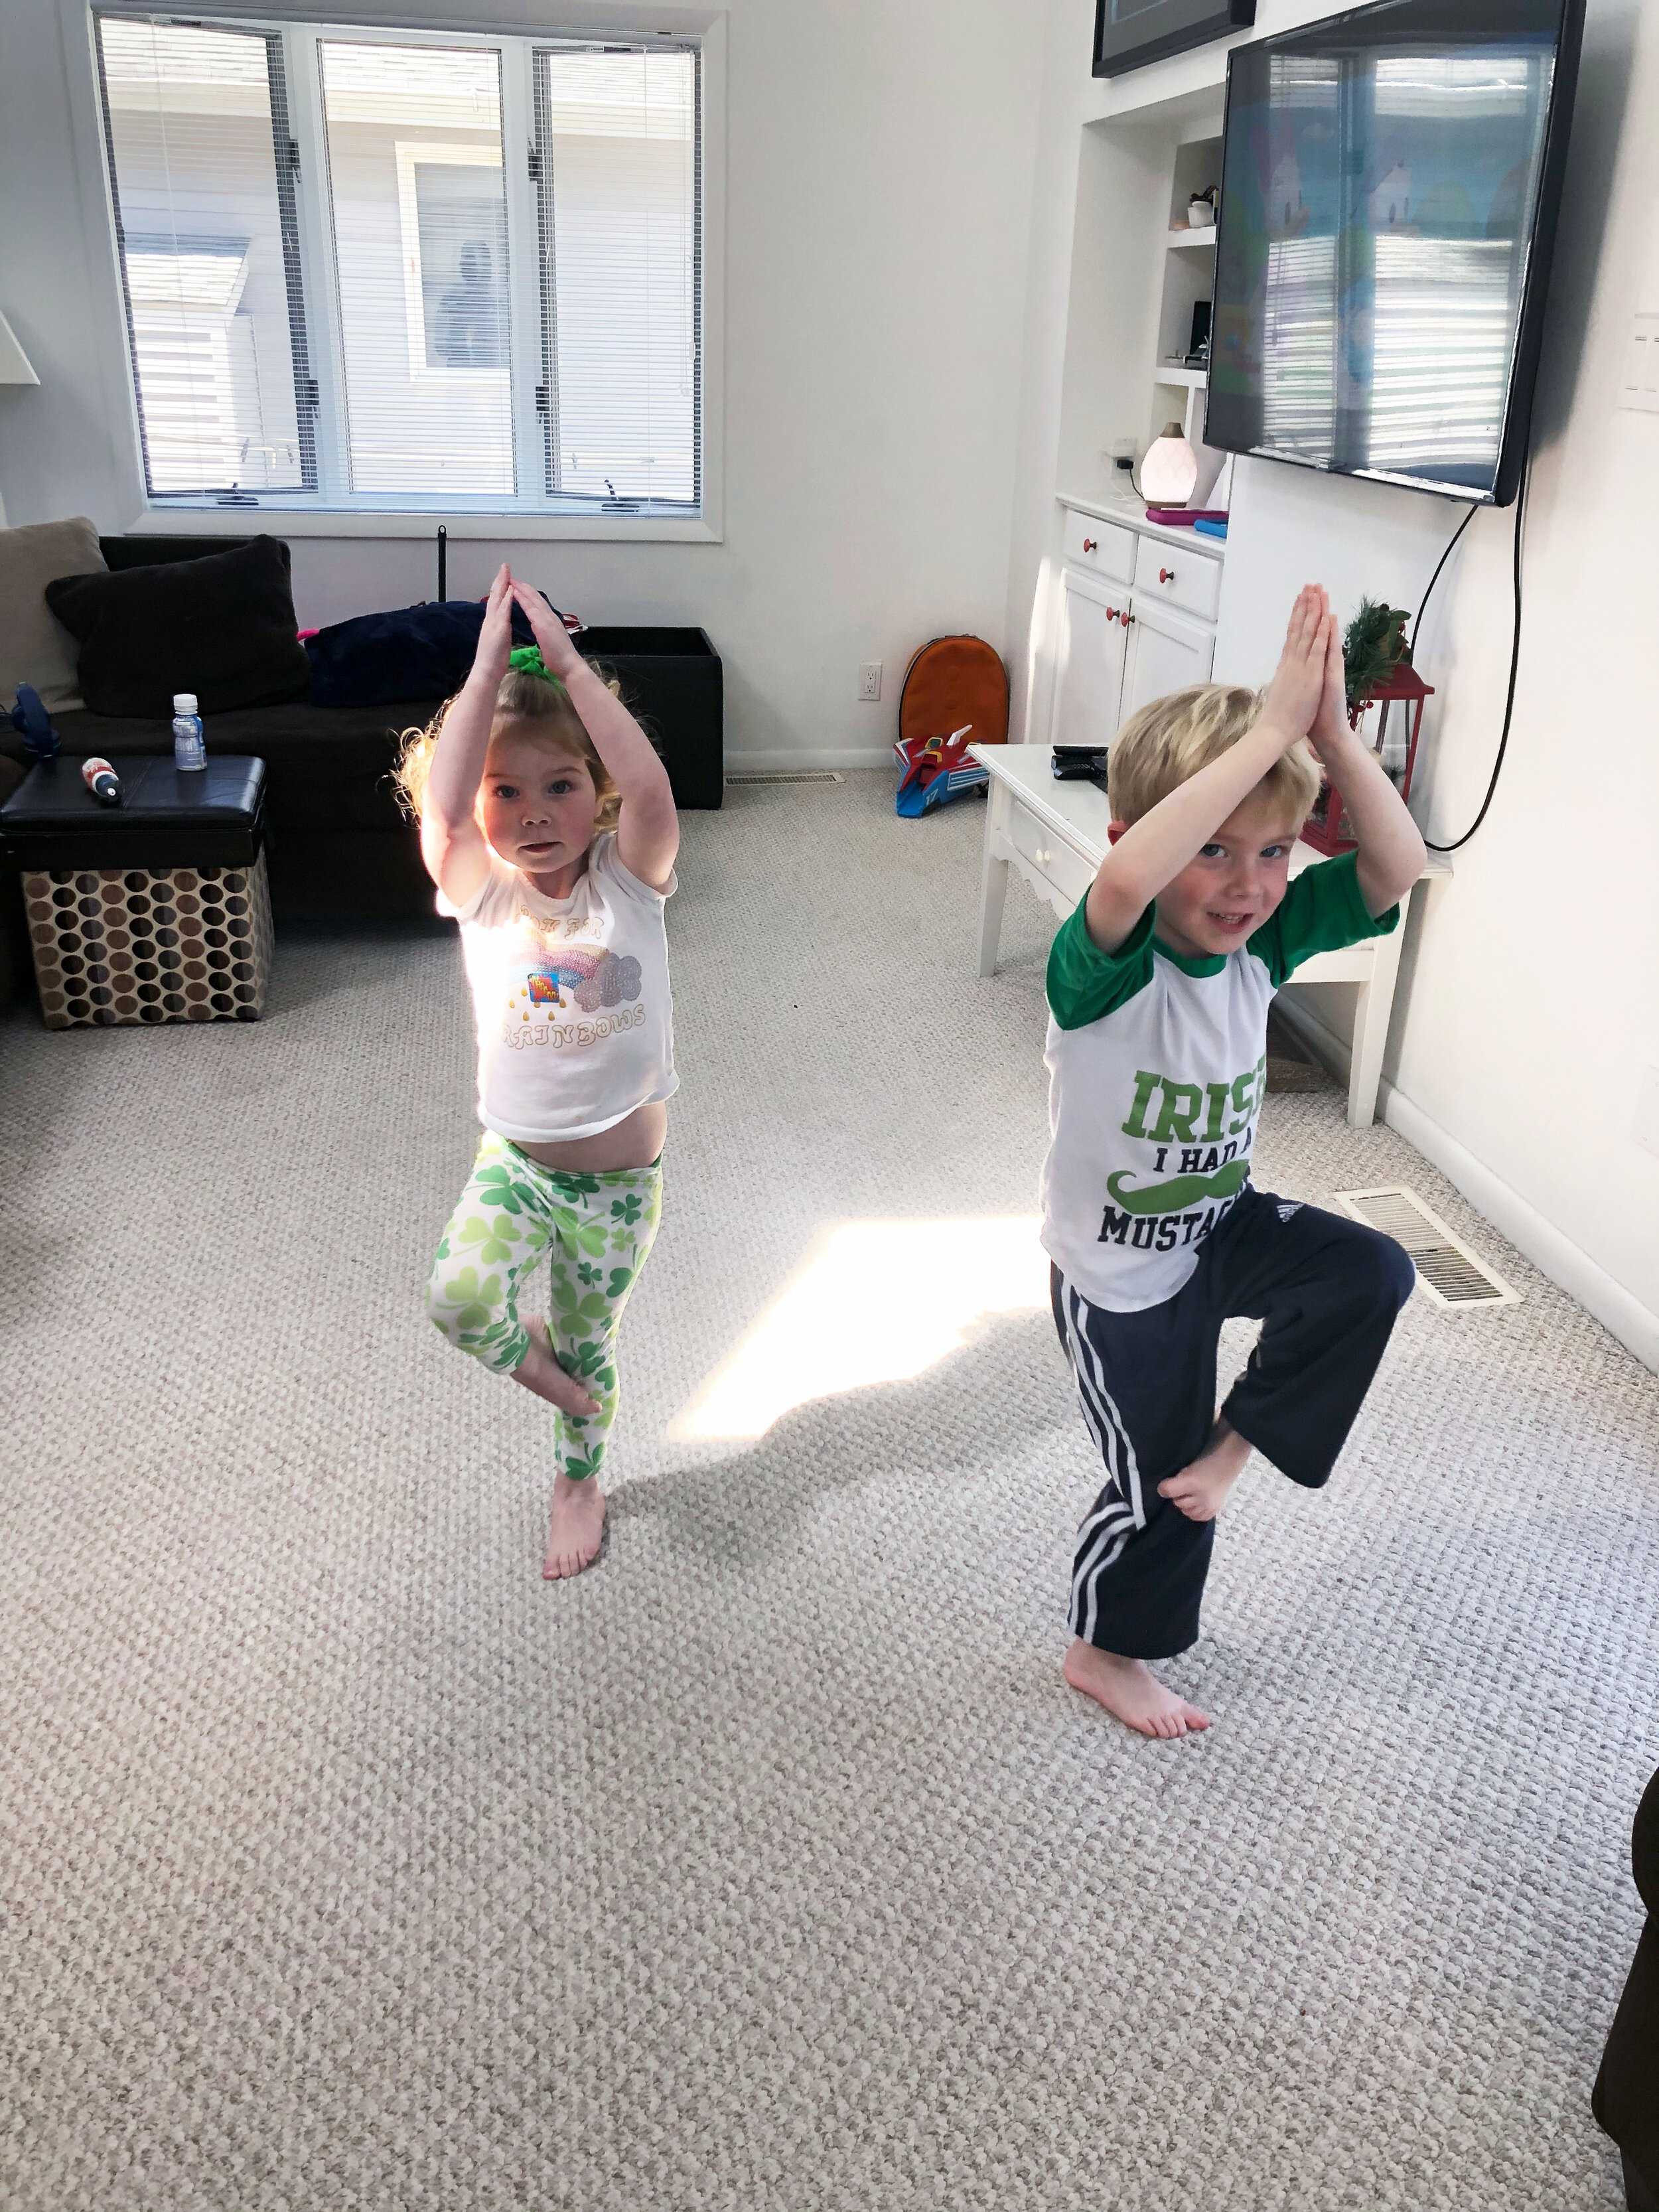 Emily and Declan practicing yoga poses.